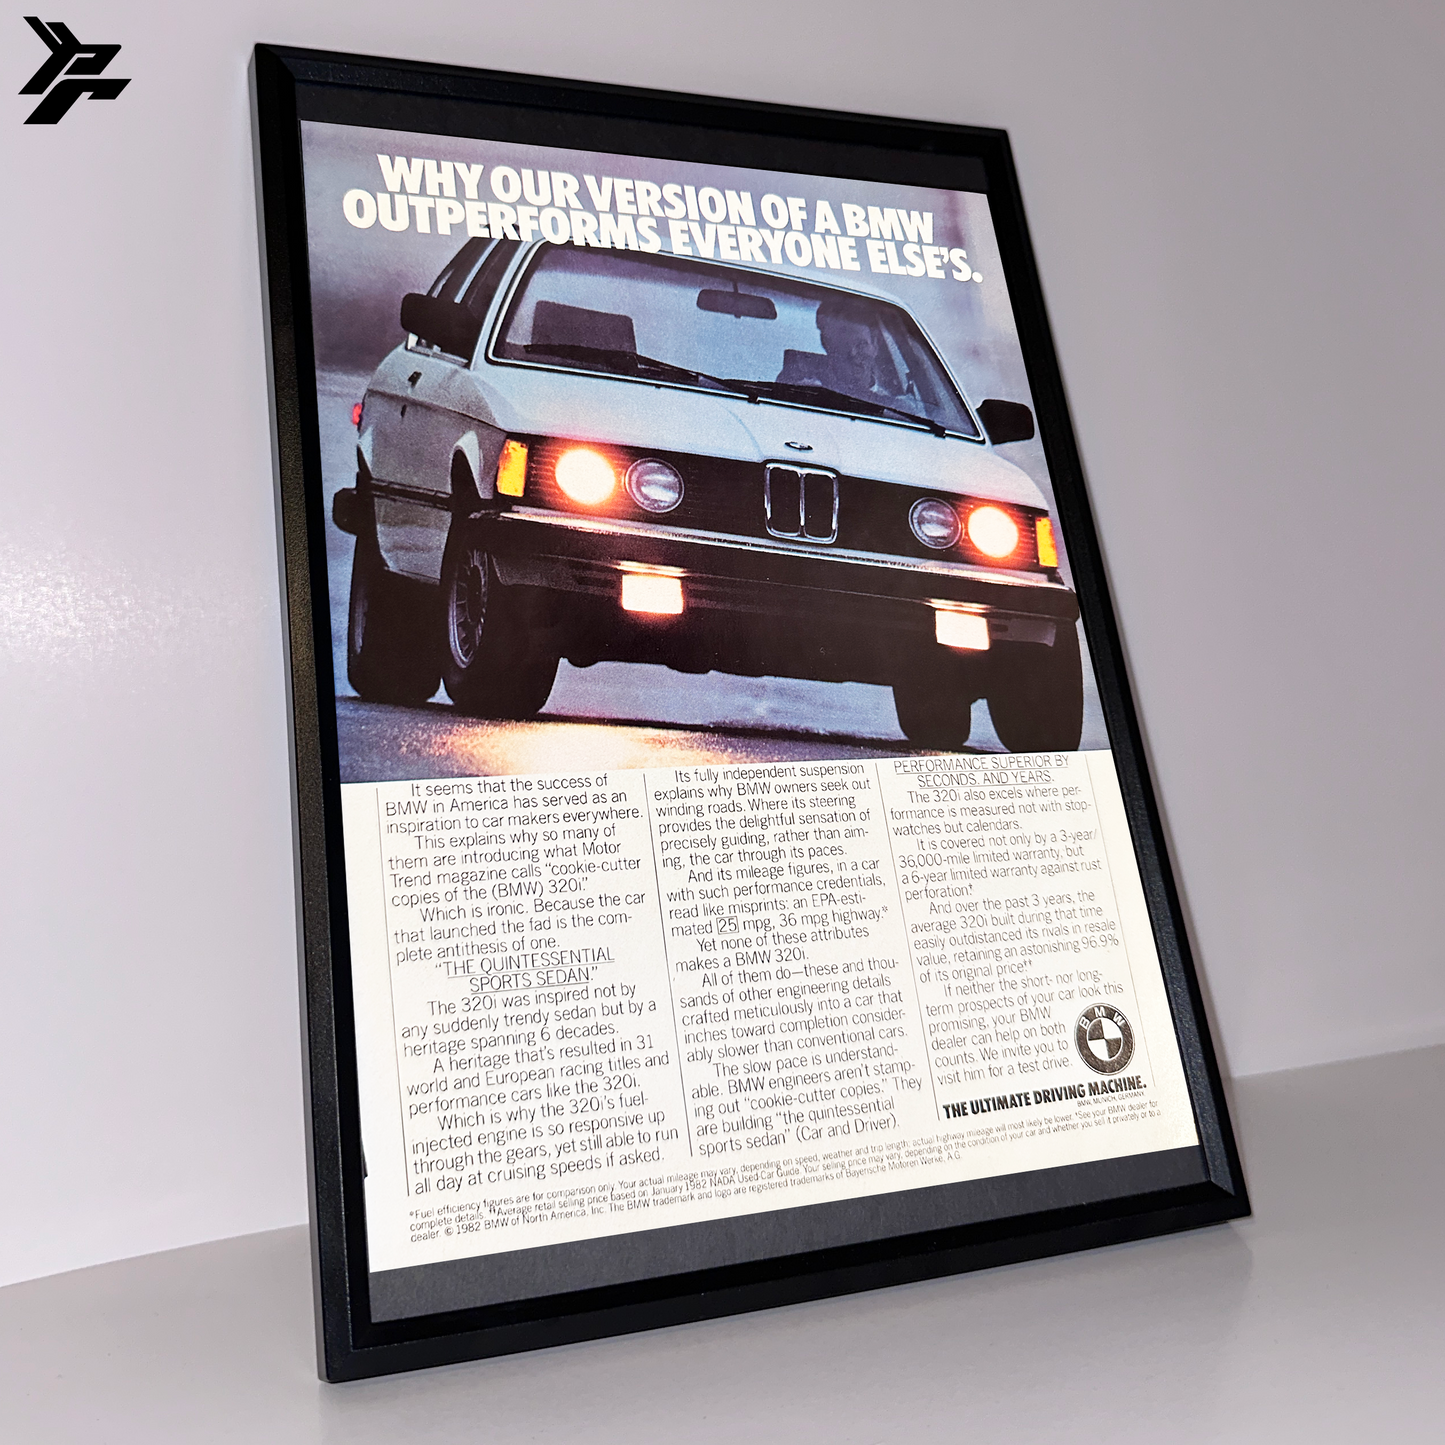 Bmw e21 our version of bmw framed ad